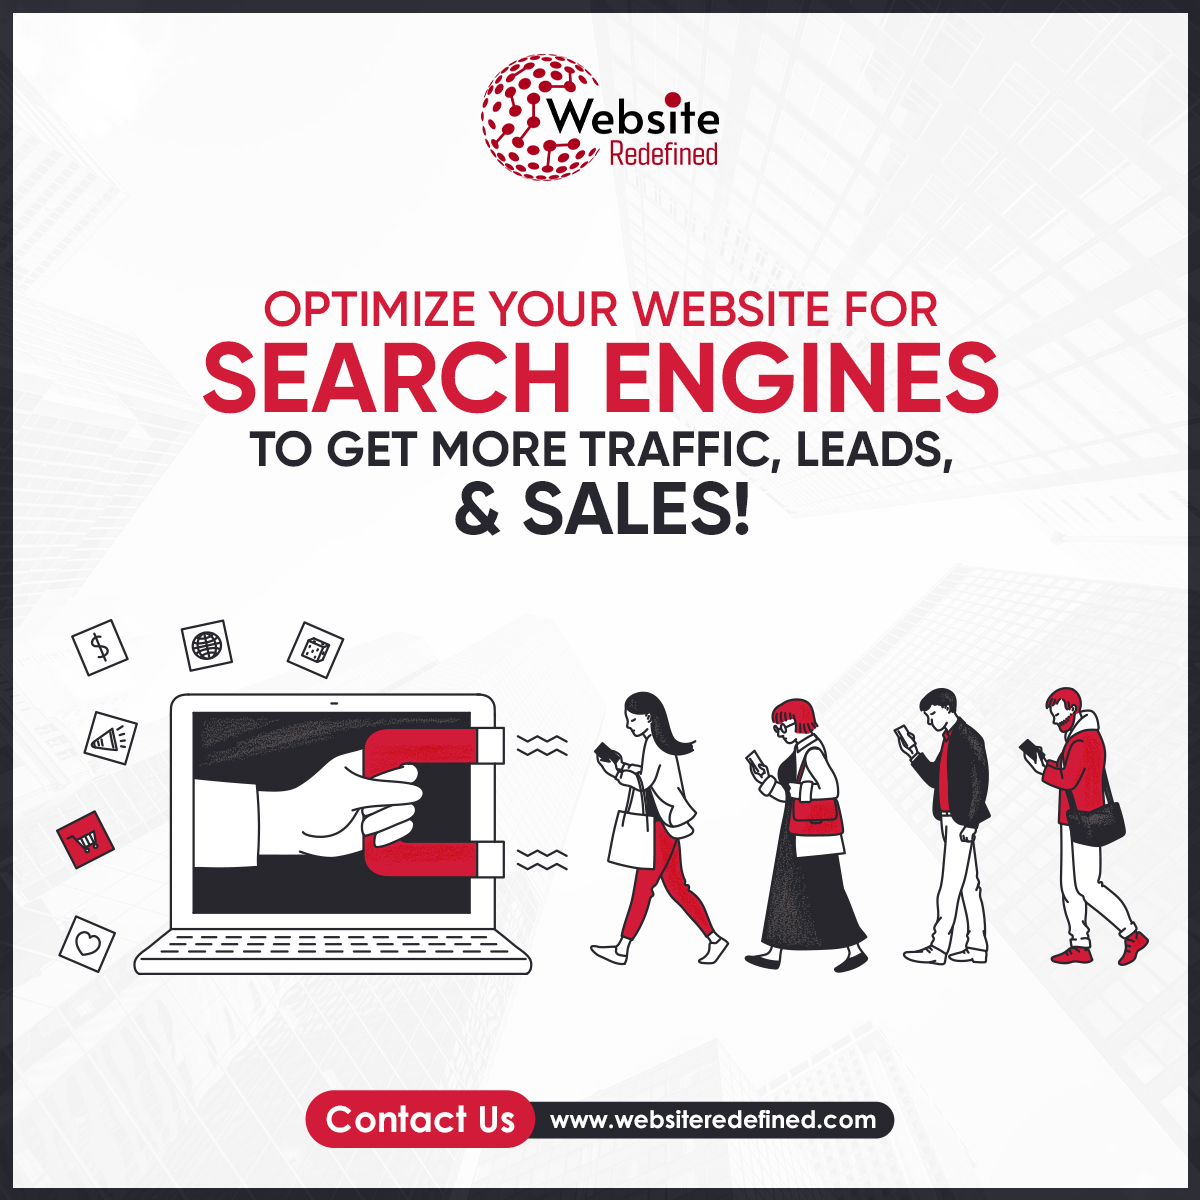 Having a well-designed website is only half the battle. Our team also specializes in SEO to ensure your website ranks higher on search engines and attracts more organic traffic.

Contact Us!
websiteredefined.com

#webdevelopment #websiteredefined